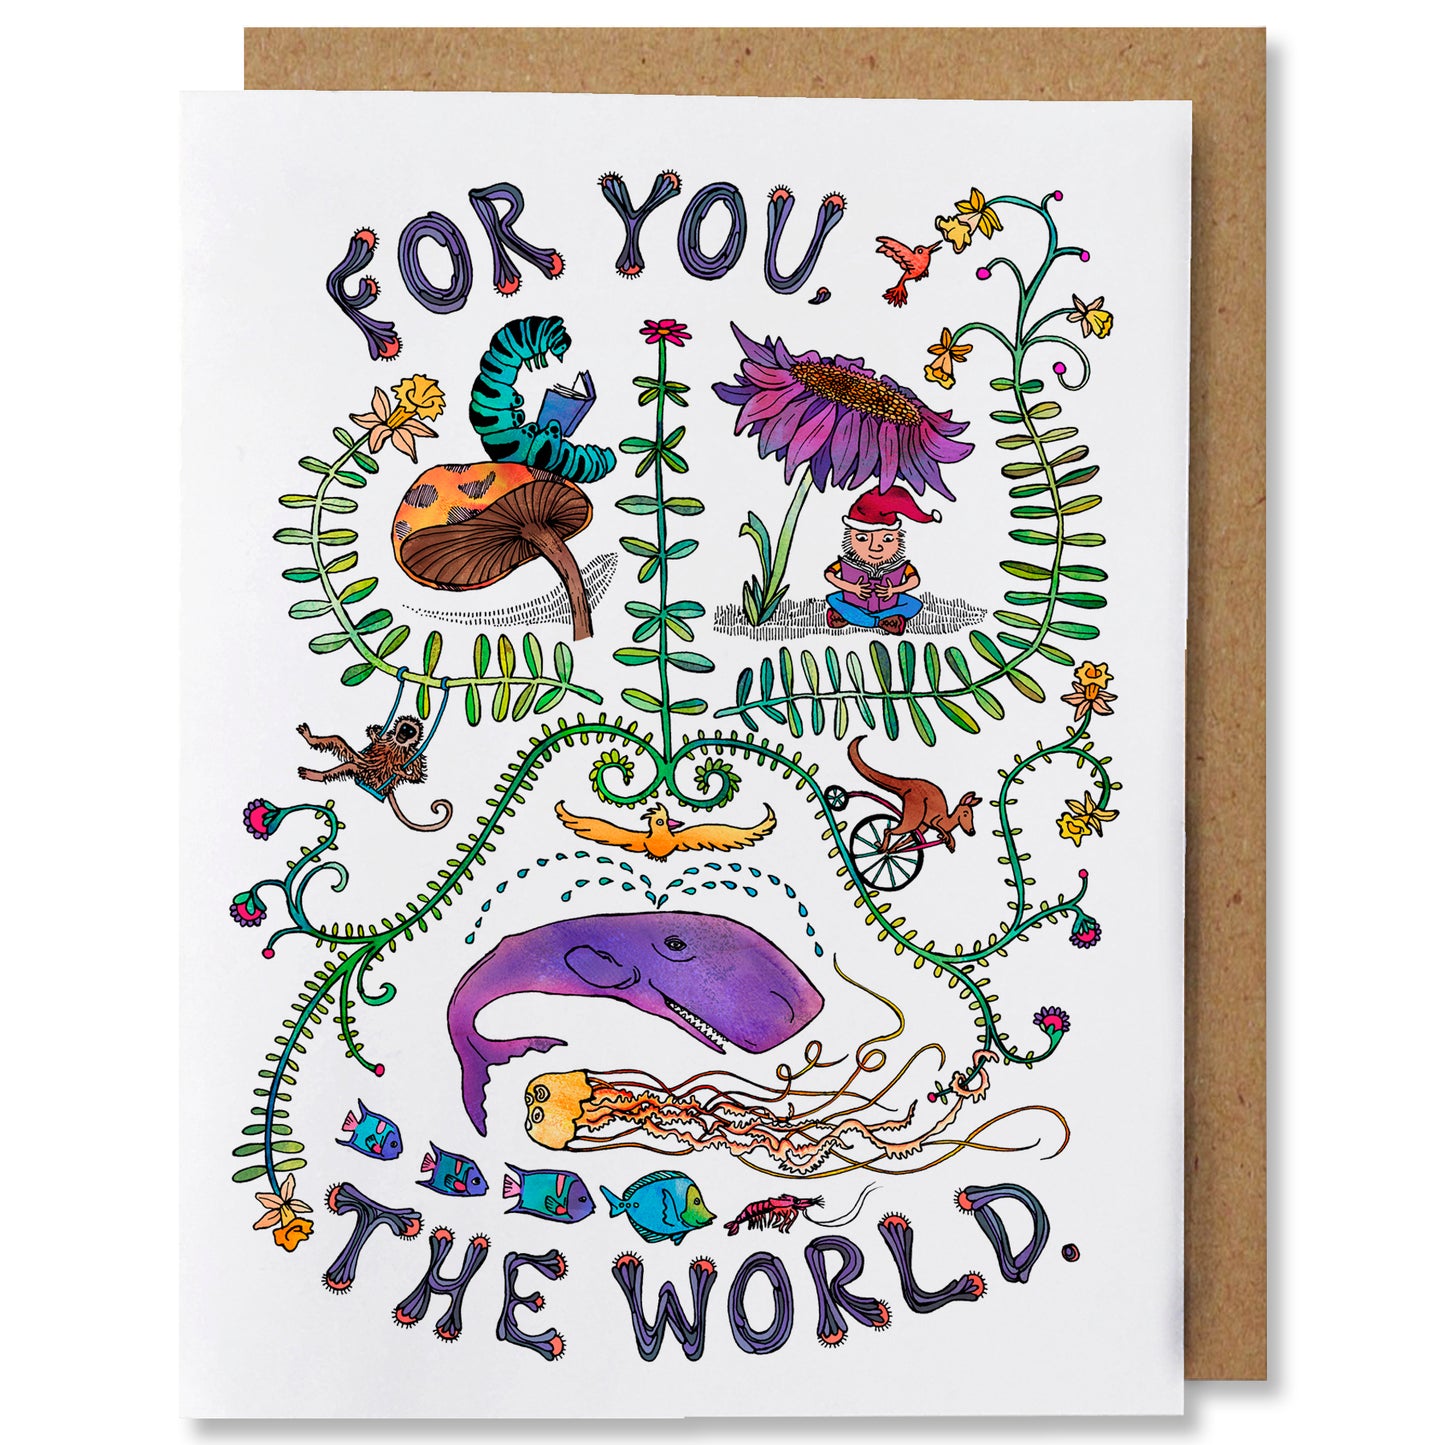 Multi-colored Illustrated everyday greeting card for love, congratulations, or just because. Features a caterpillar on a mushroom reading a book, gnome sitting under a flower reading, kangaroo on a bicycle, monkey on a swing, whale, fish, jellyfish, with plant vines separating the image into quadrants. “For You, The world” written across the top and bottom.